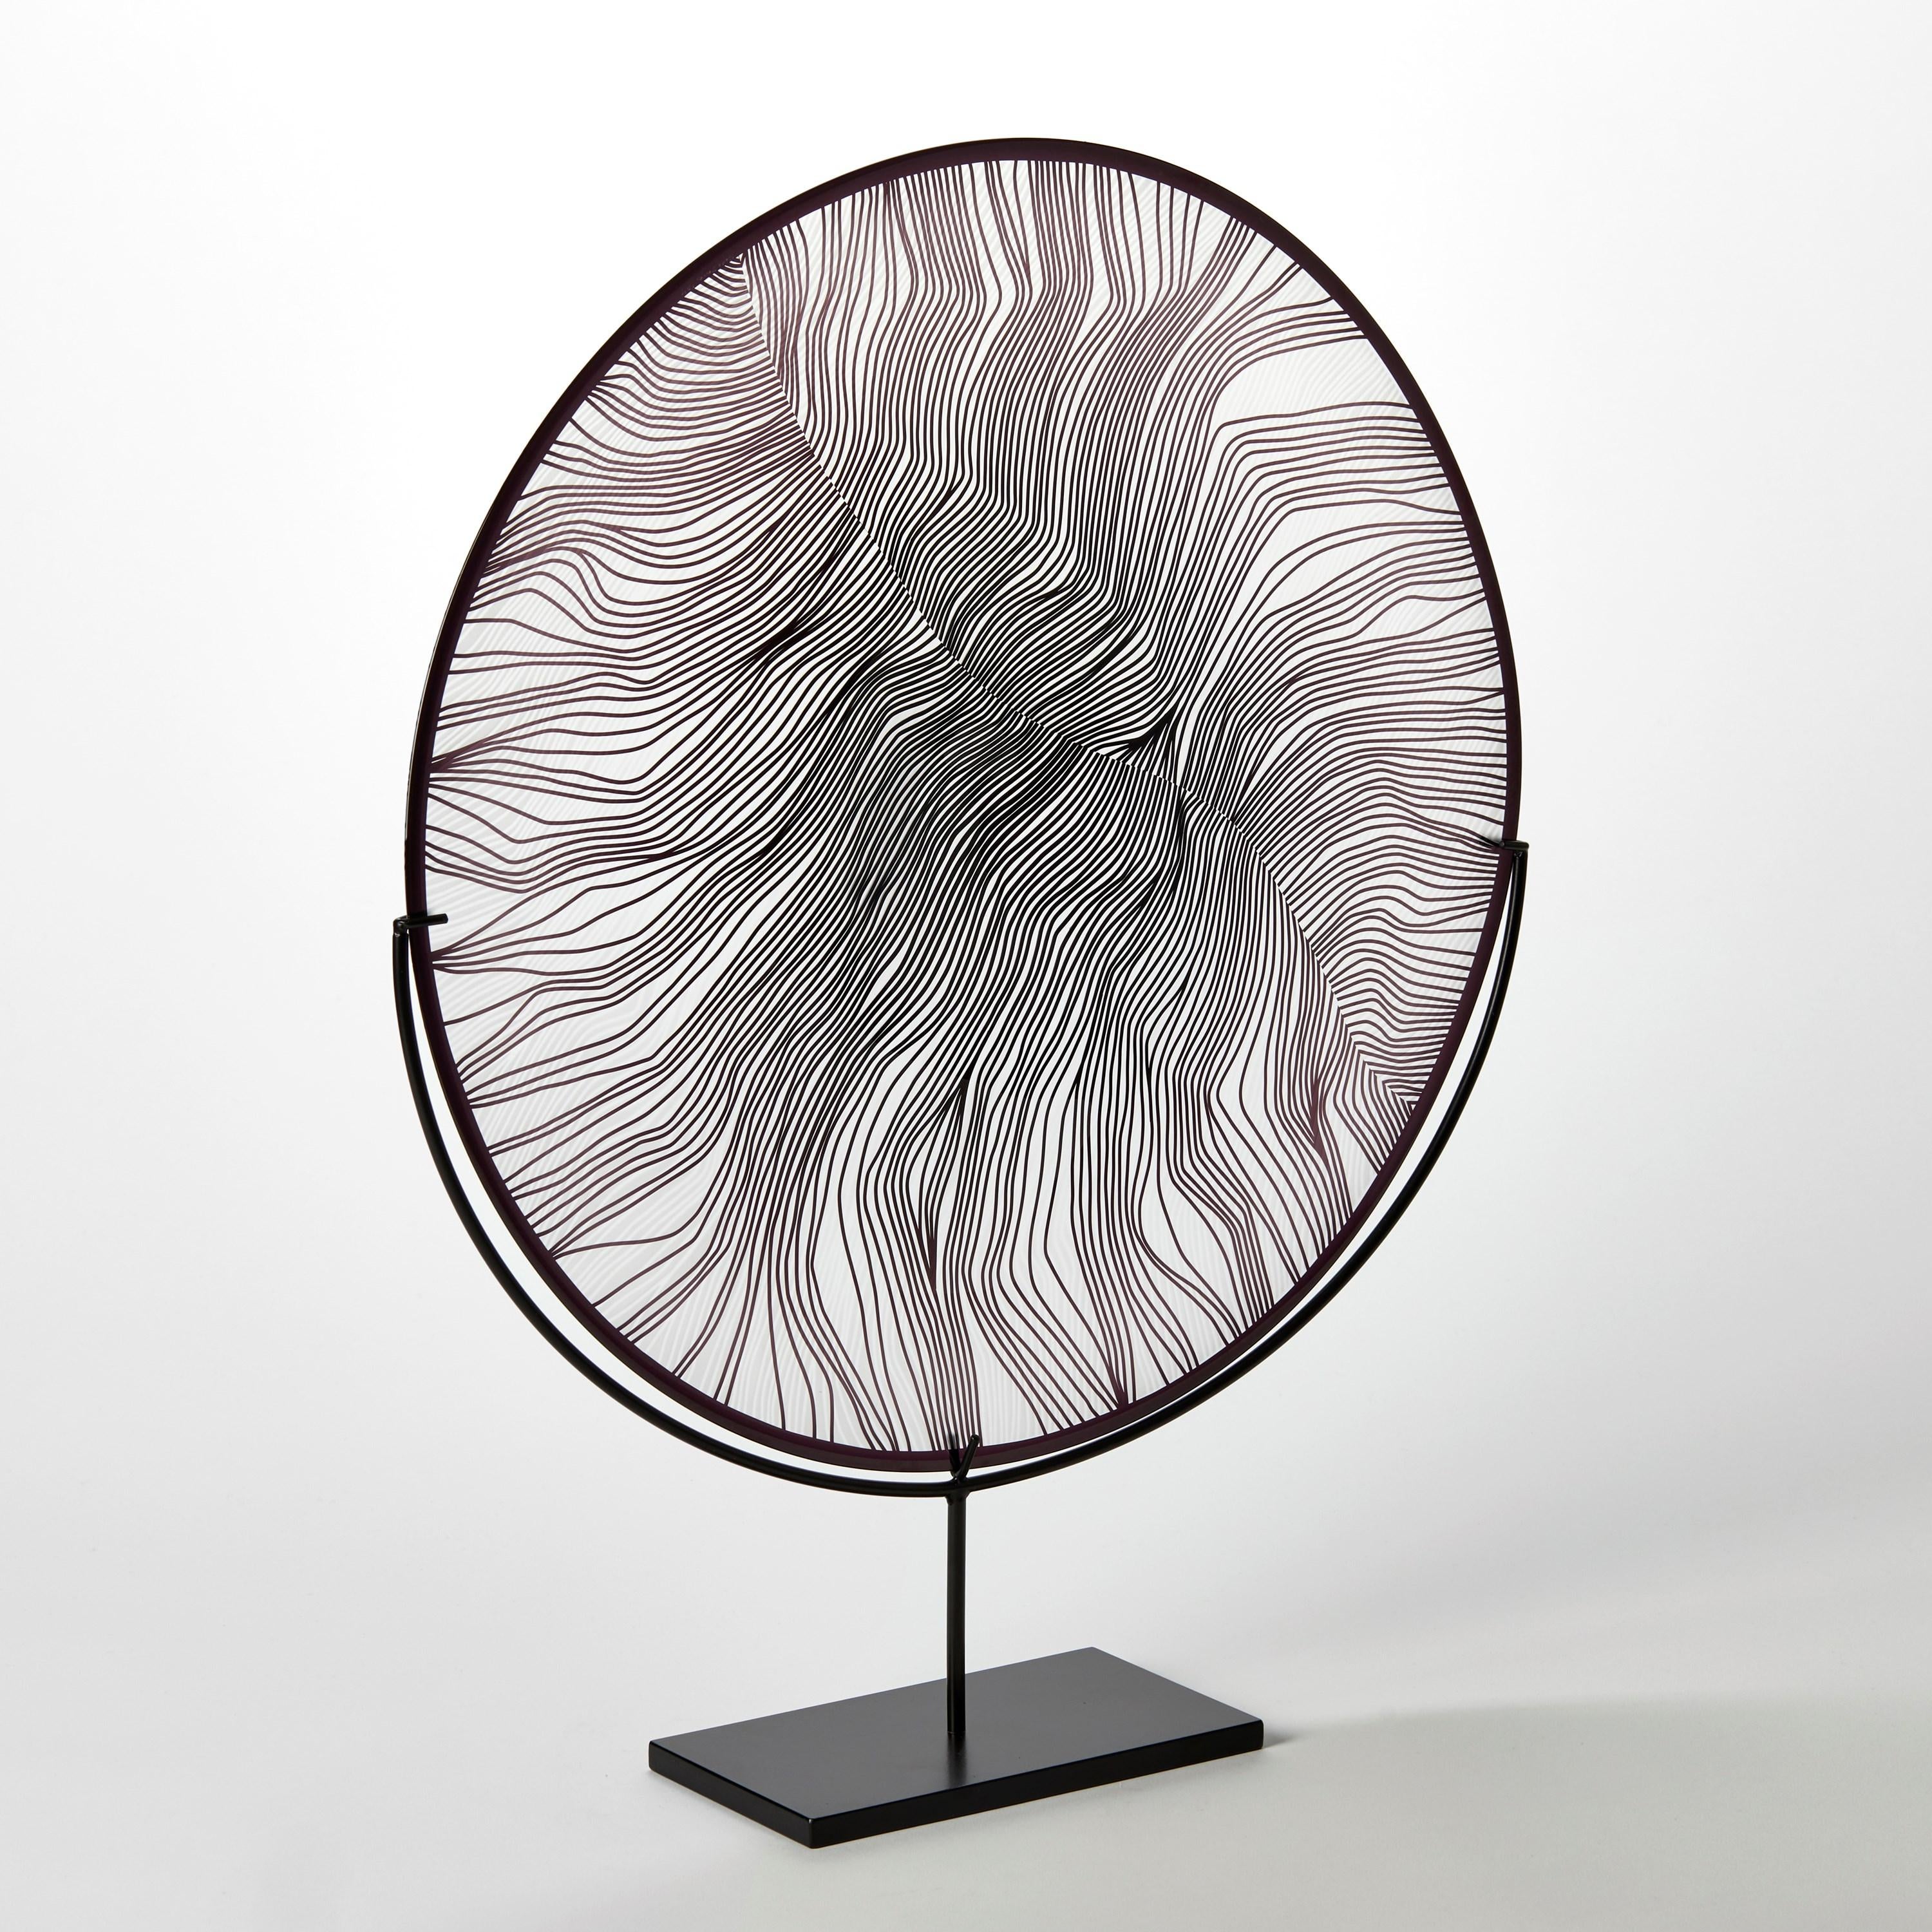 Organic Modern Solar Storm Monochrome IV, graphic abstract glass artwork + stand by Kate Jones For Sale